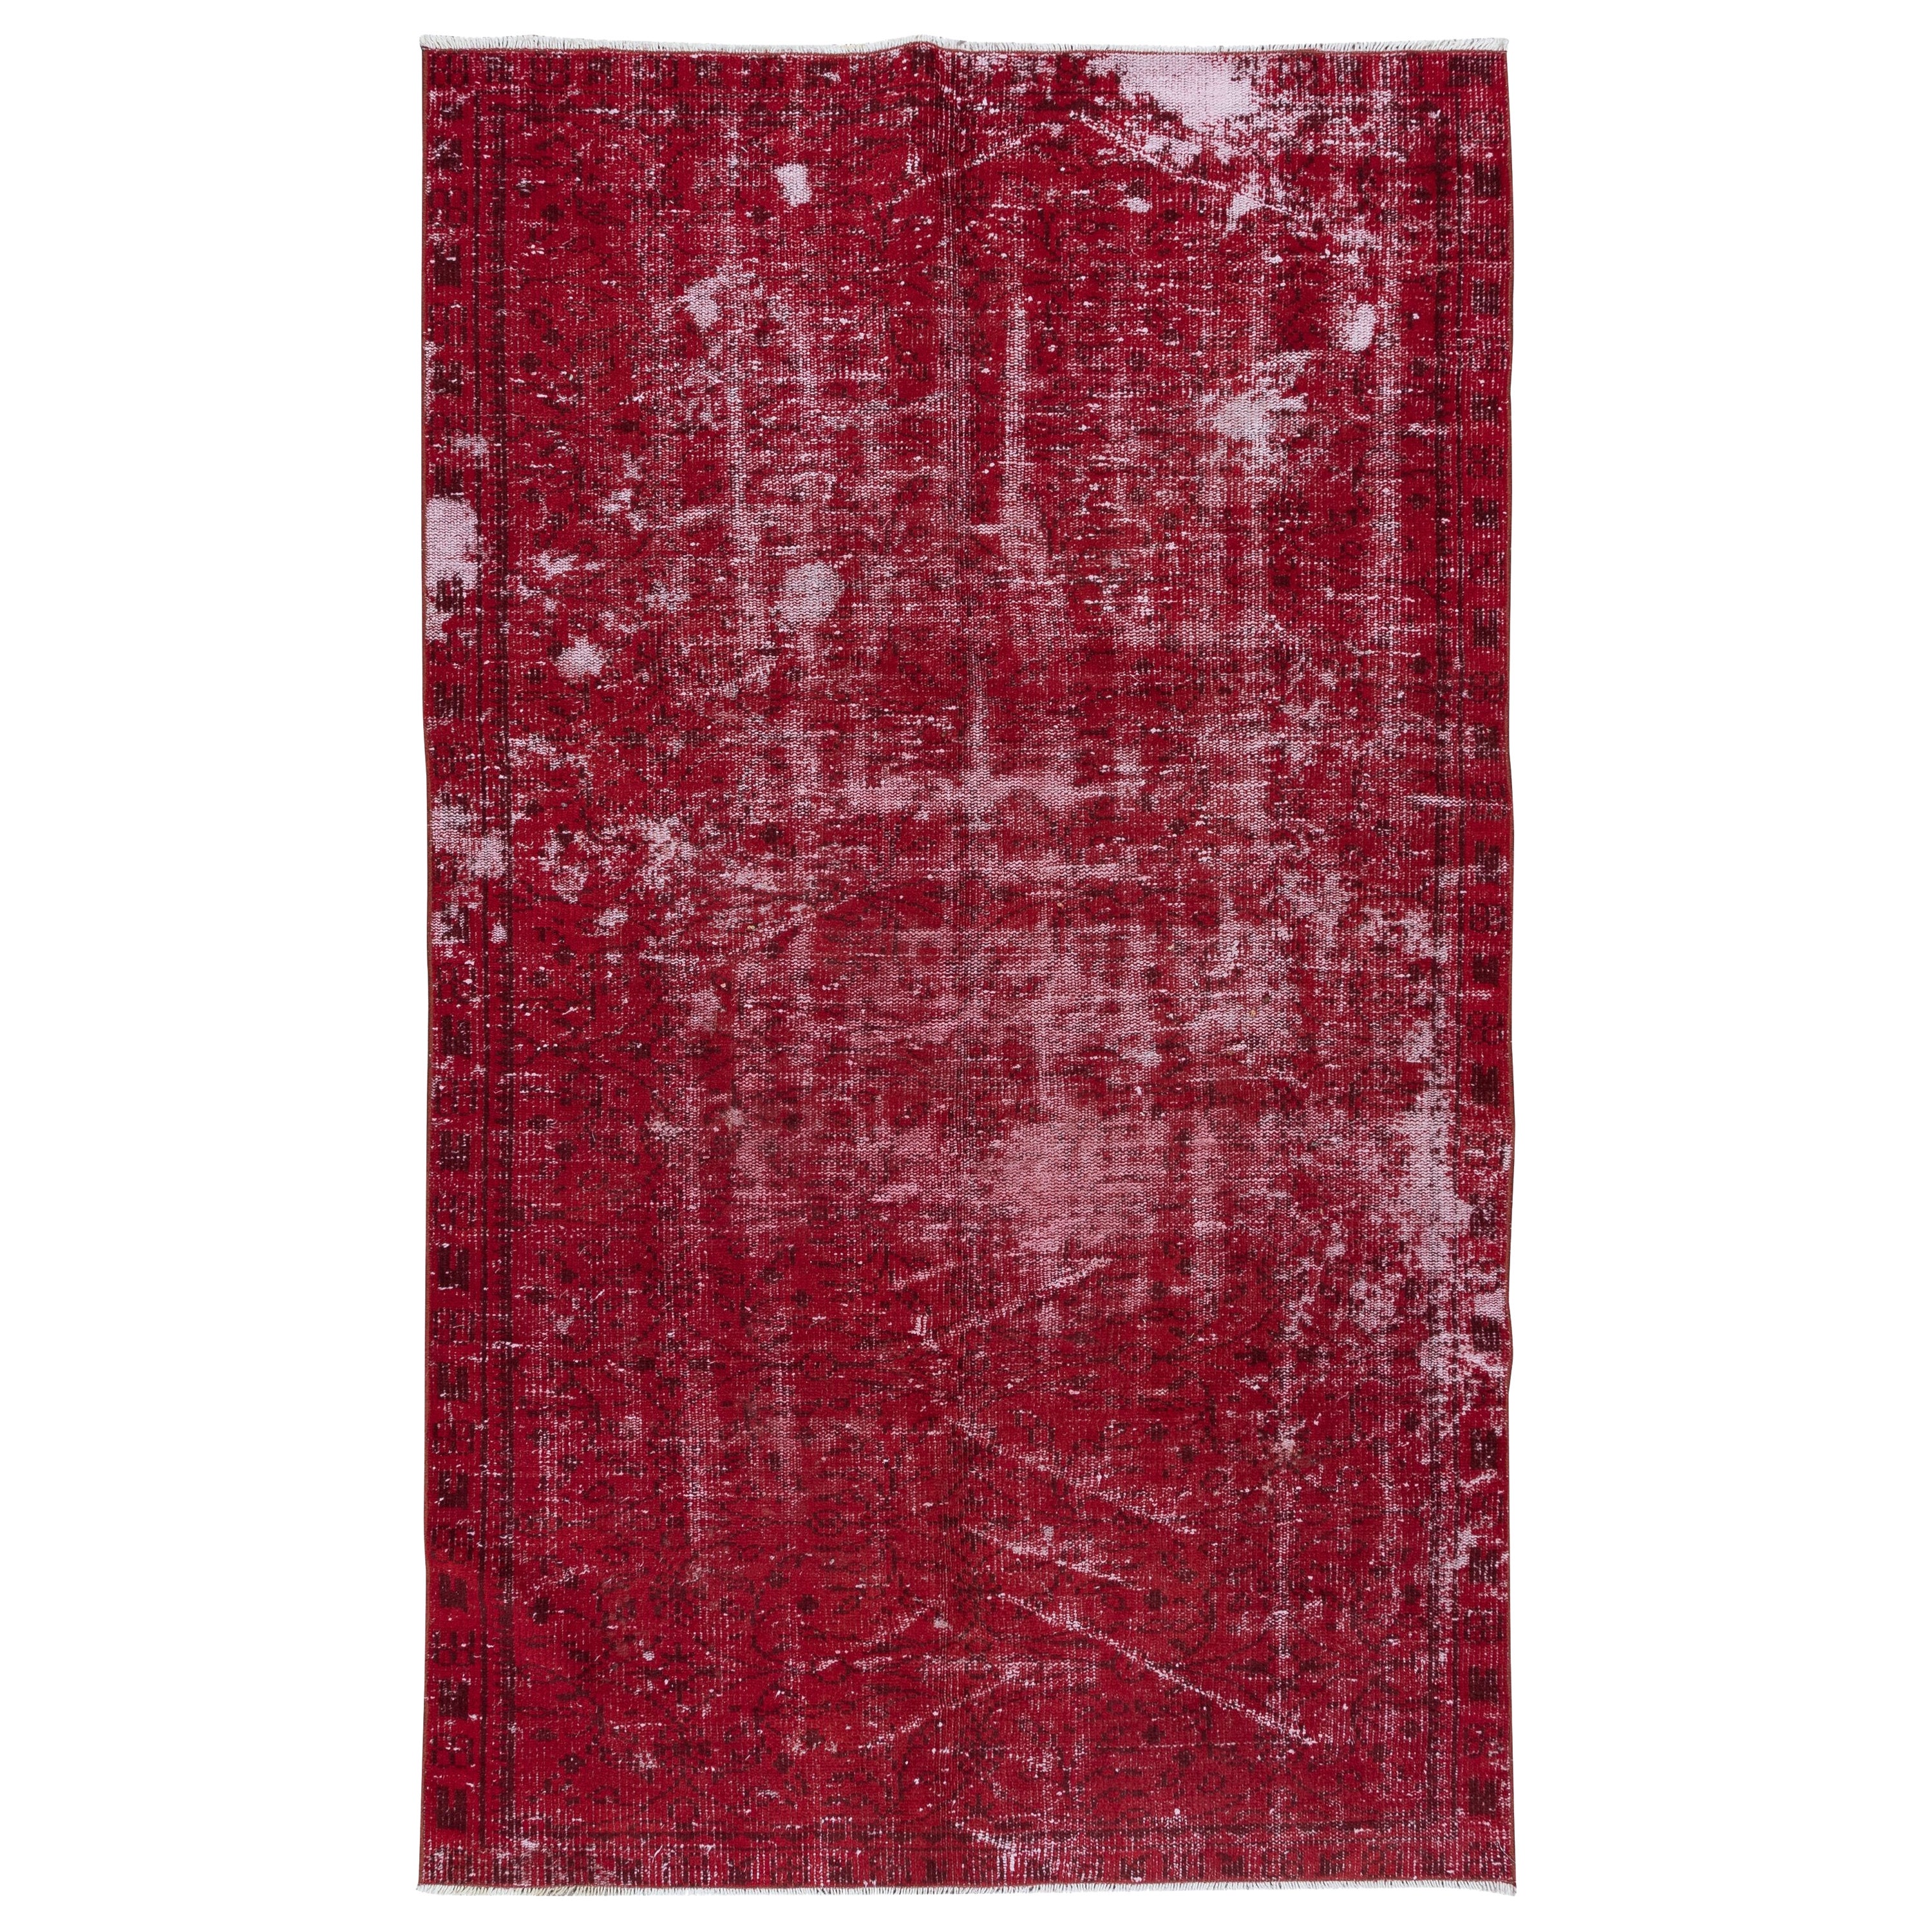 4.6x7.7 Ft Contemporary Handmade Turkish Red Area Rug with Shabby Chic Style For Sale